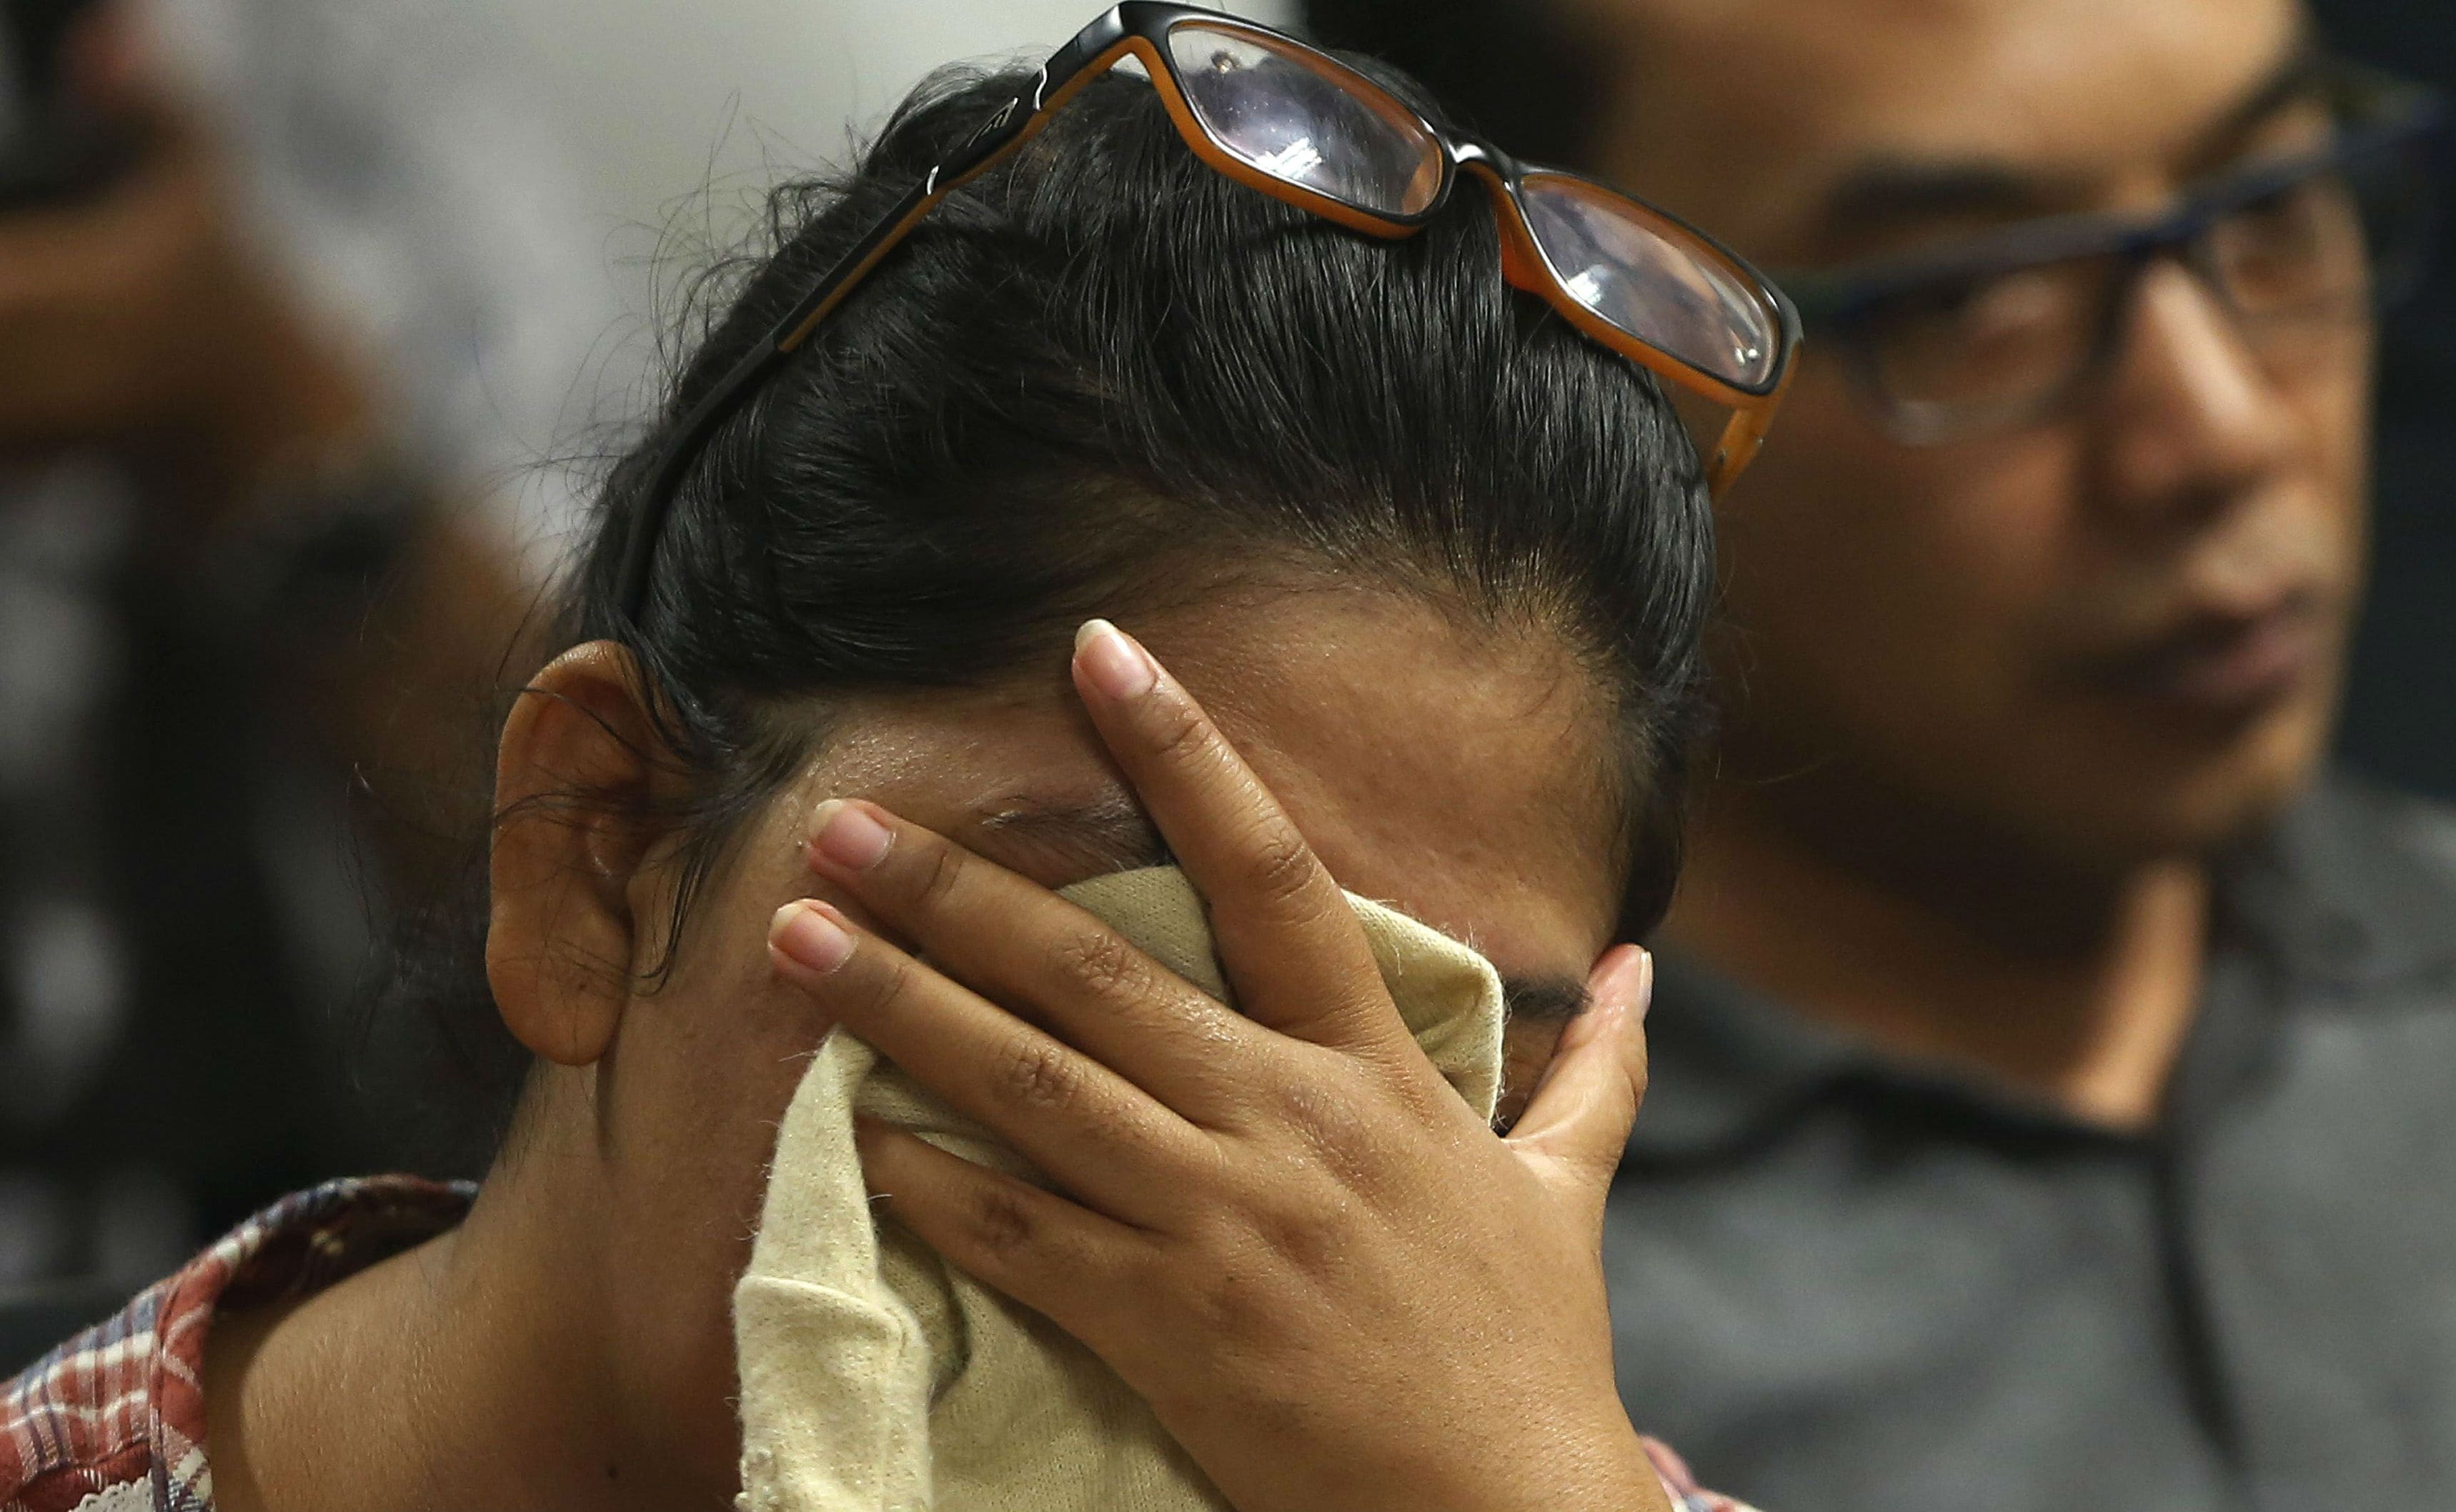 Teams Mobilized to Search for Missing AirAsia Airliner